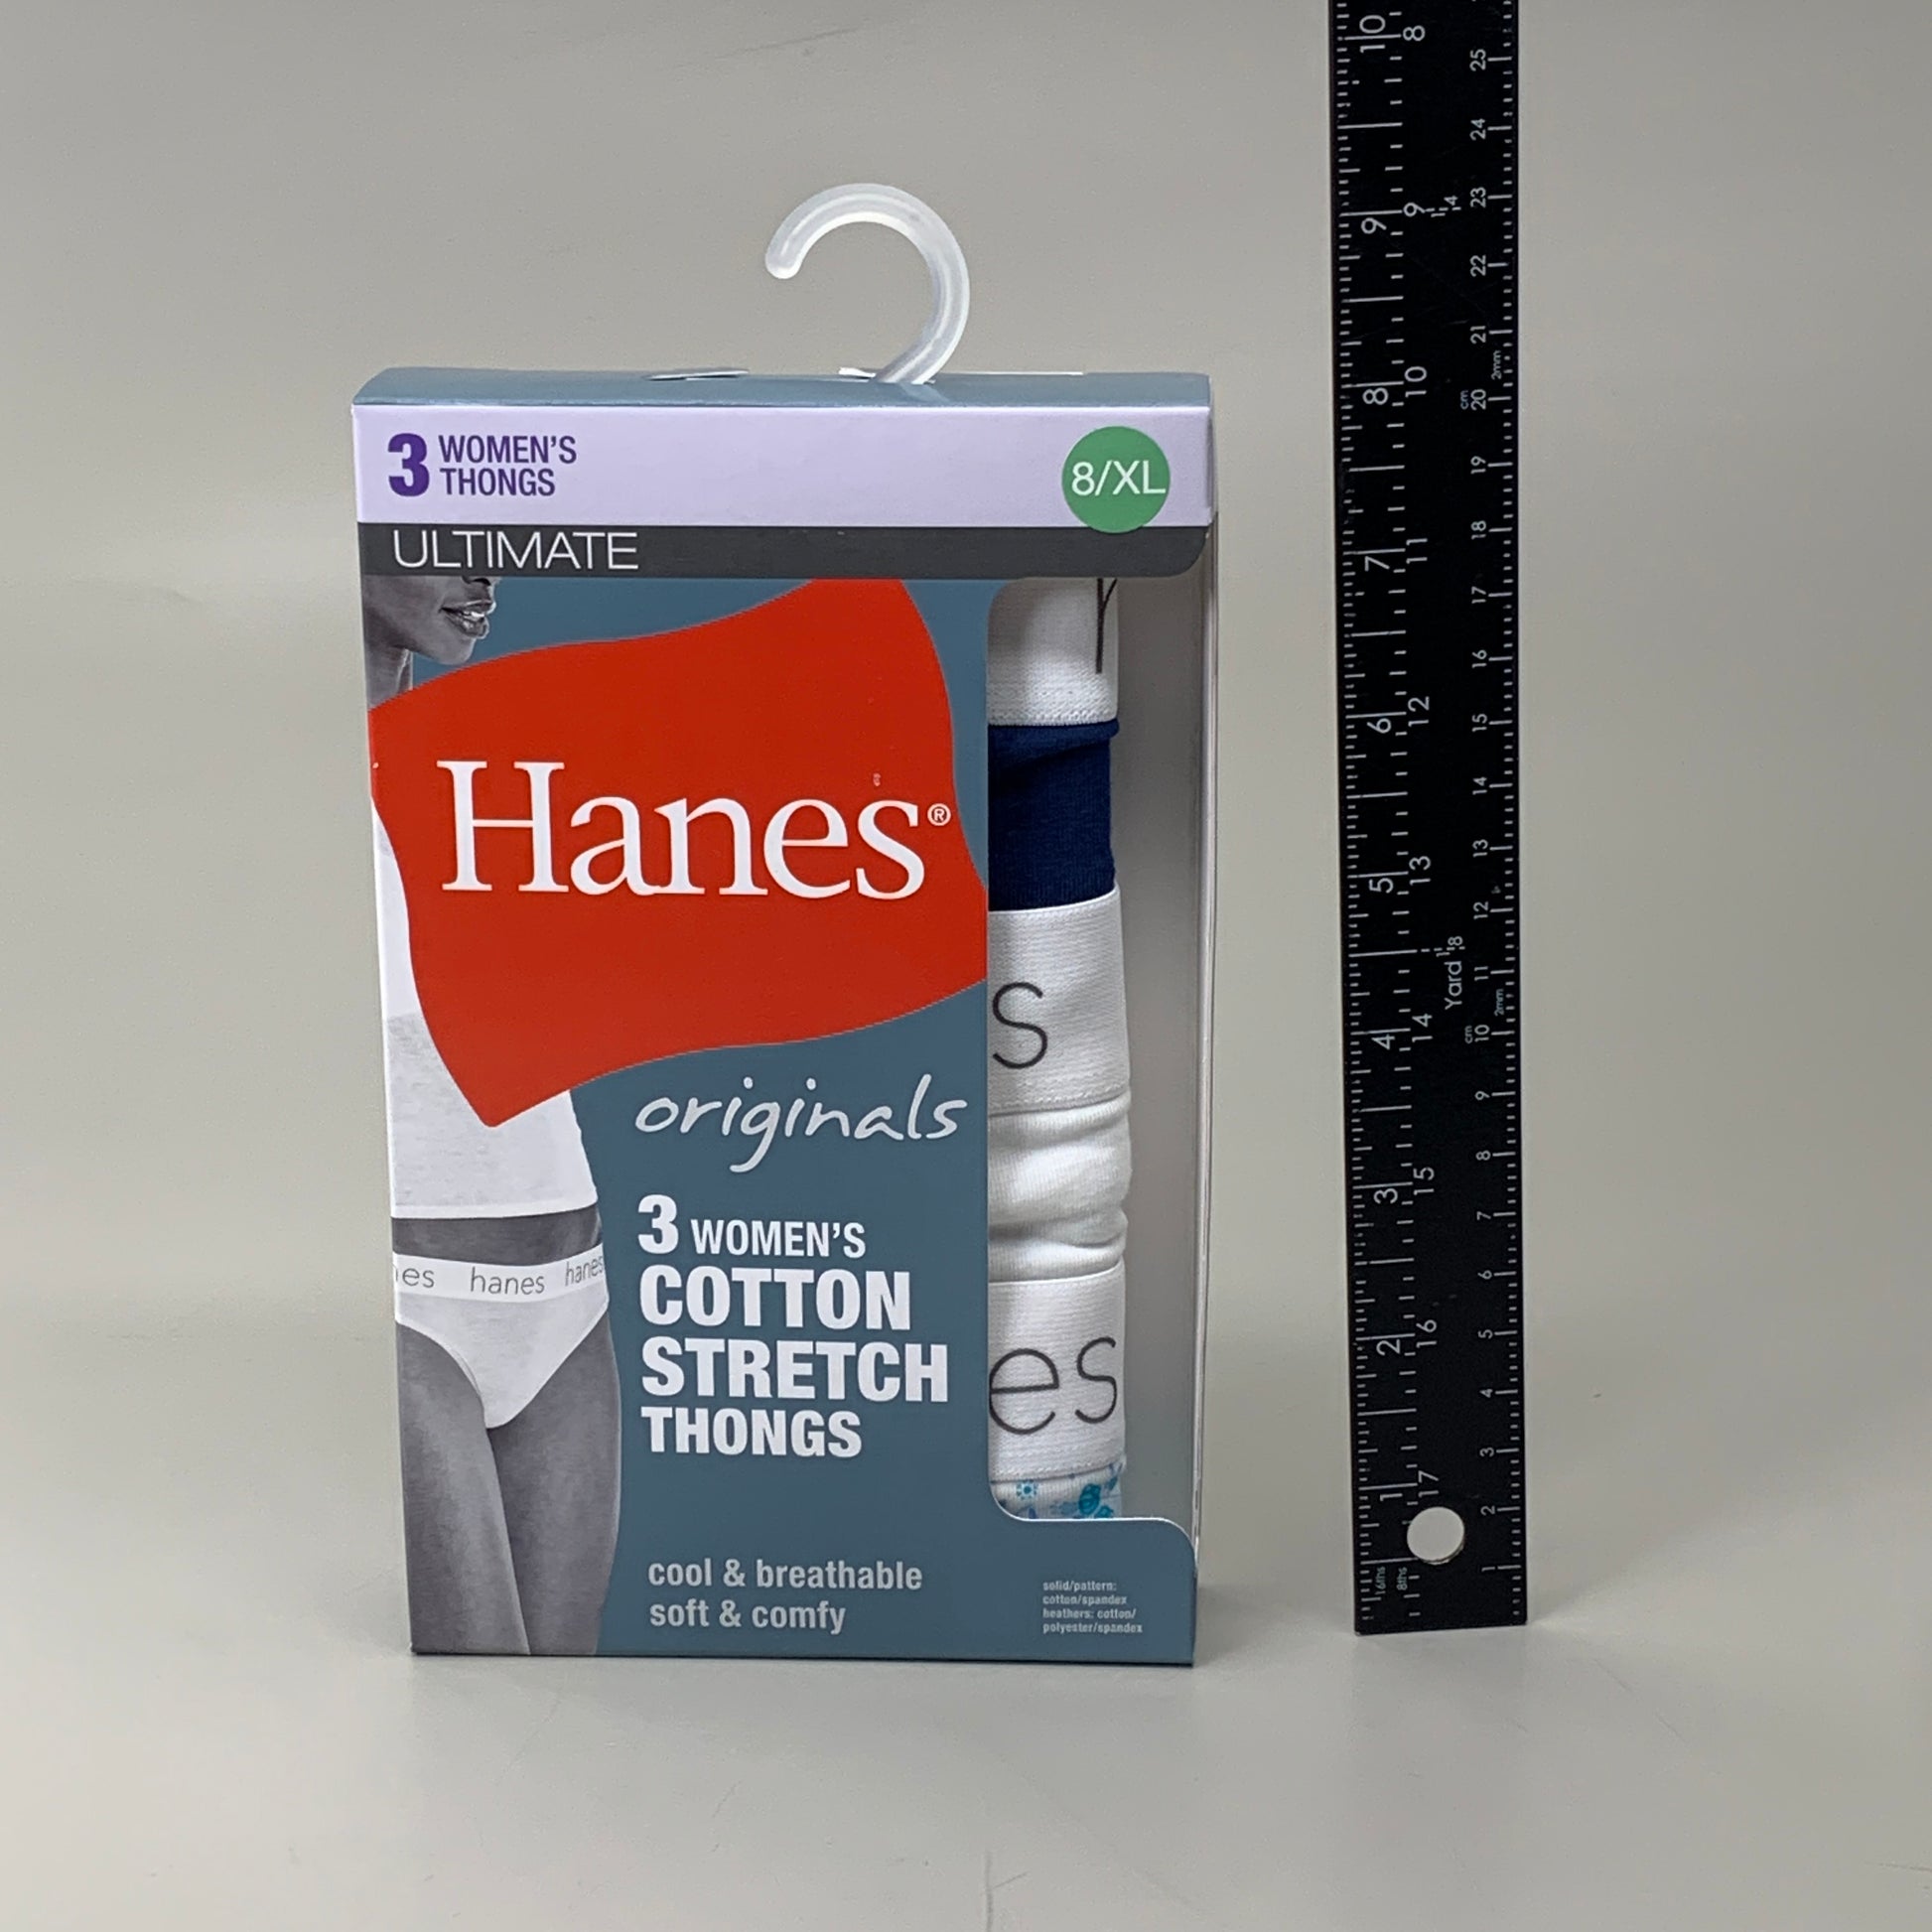 HANES 3 PACK!! Originals Women's Breathable Cotton Stretch Thongs